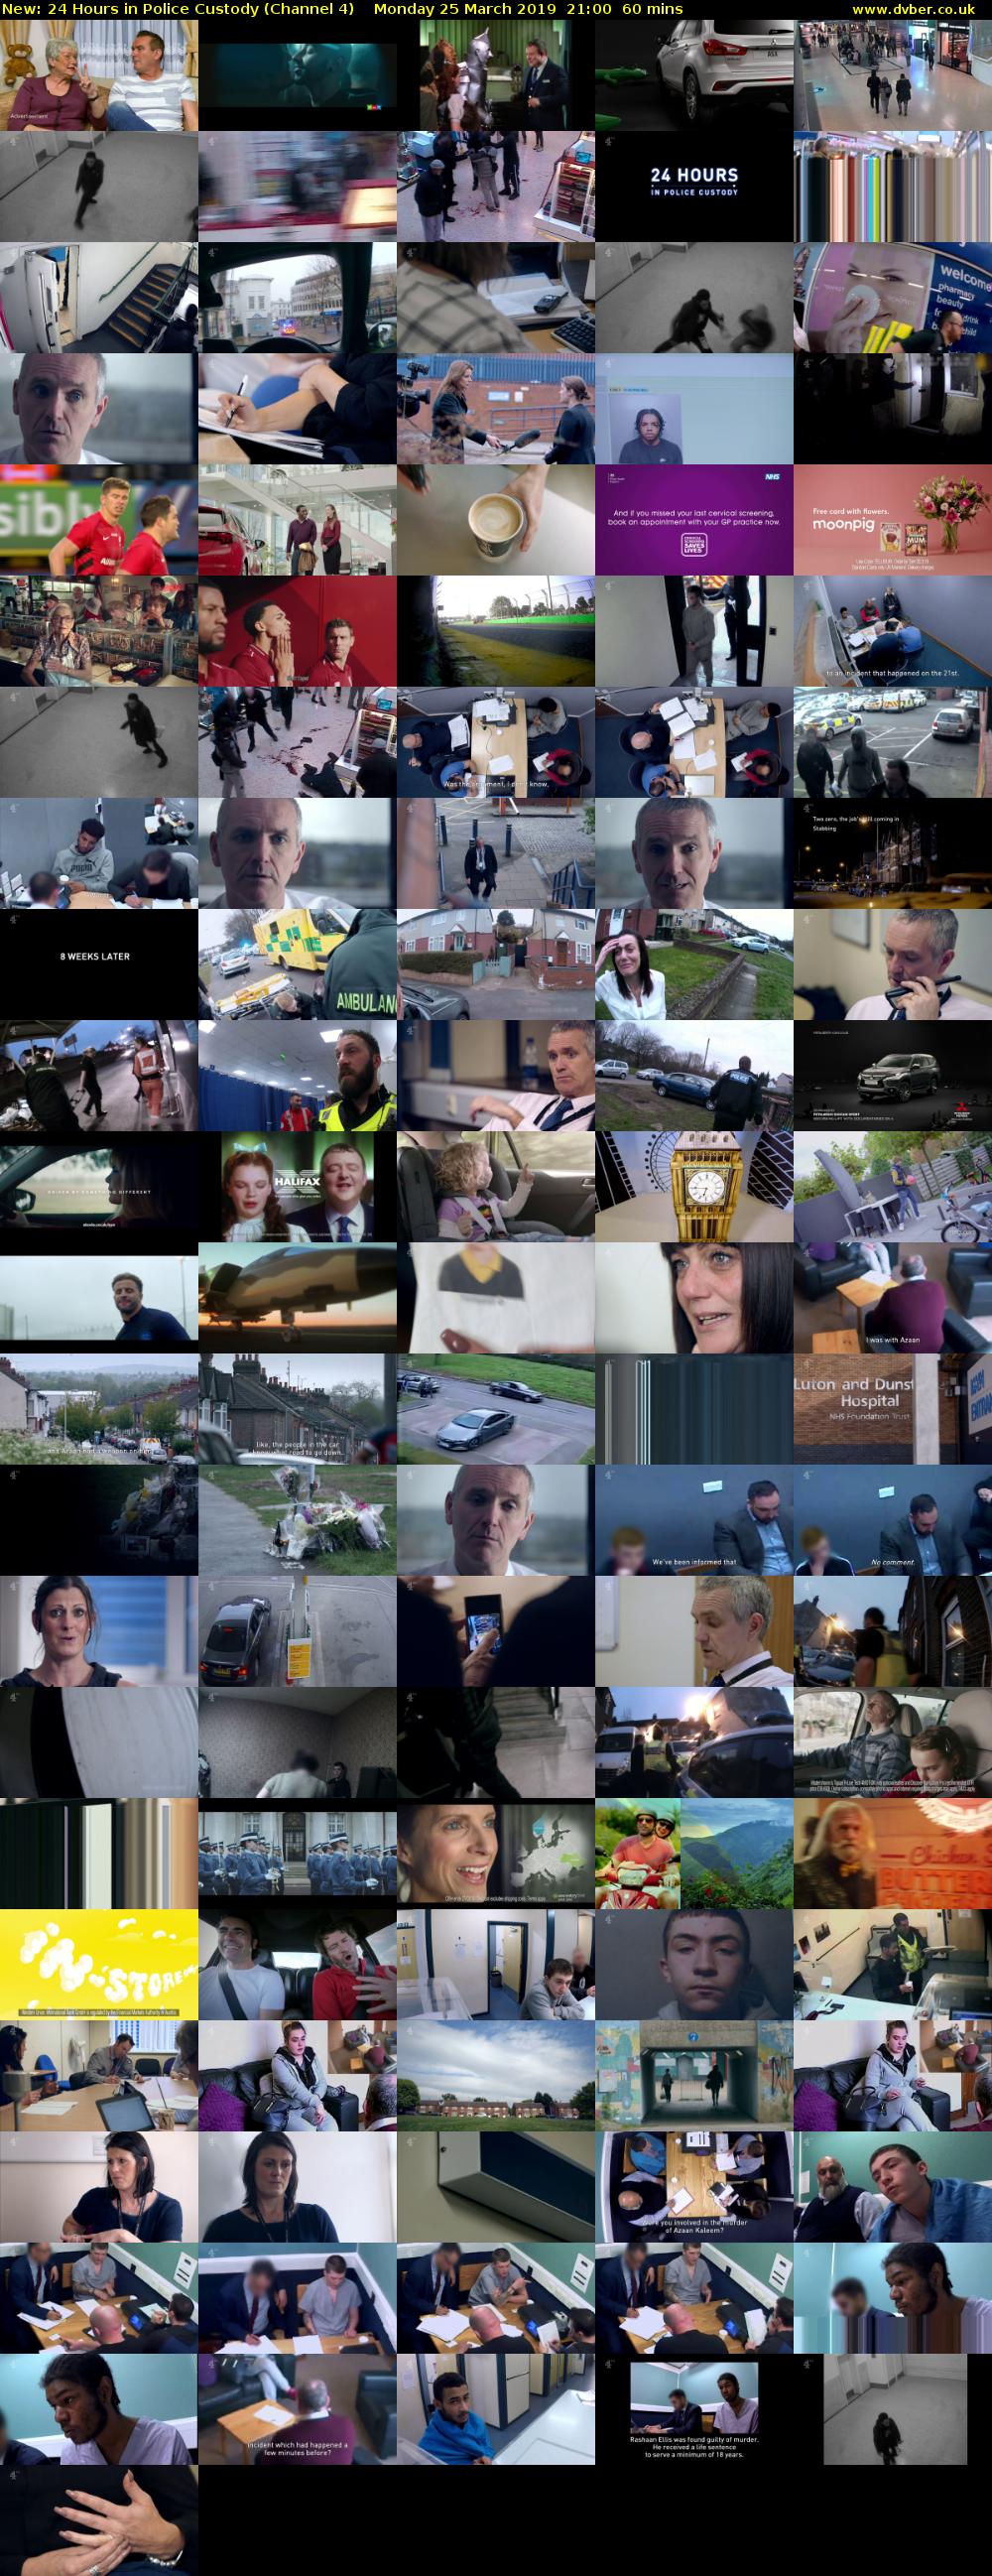 24 Hours in Police Custody (Channel 4) Monday 25 March 2019 21:00 - 22:00